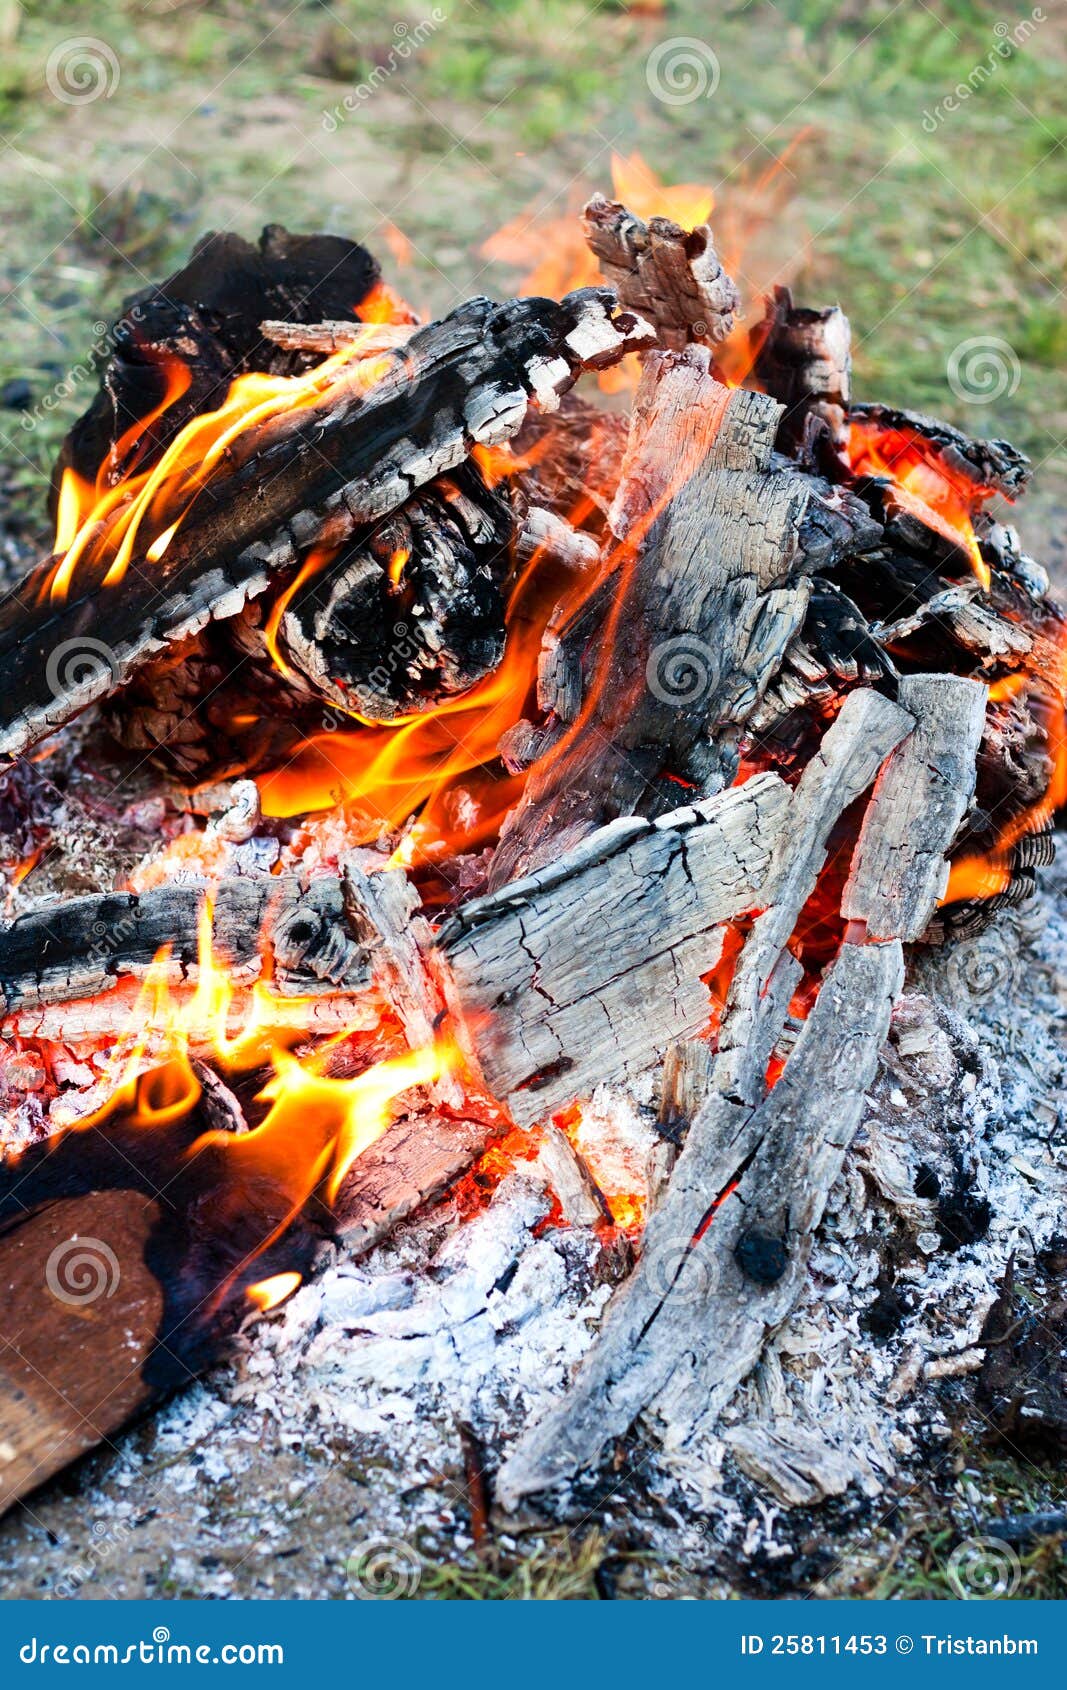 Campfire stock image. Image of burning, warm, coal, outdoor - 25811453